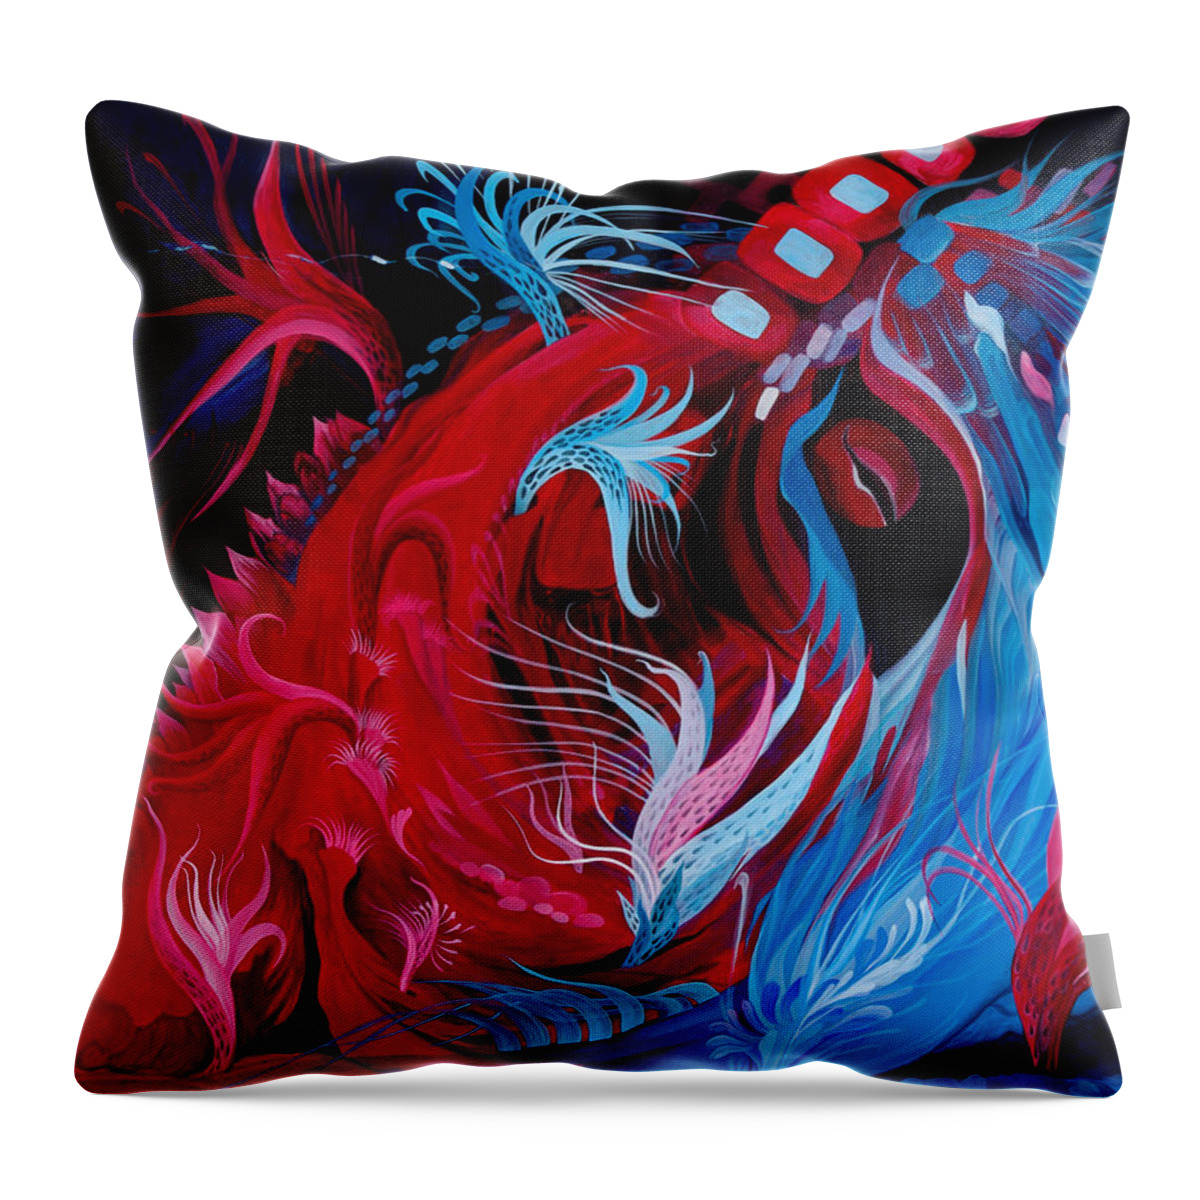 Adria Trail Throw Pillow featuring the painting As A Beating Heart by Adria Trail